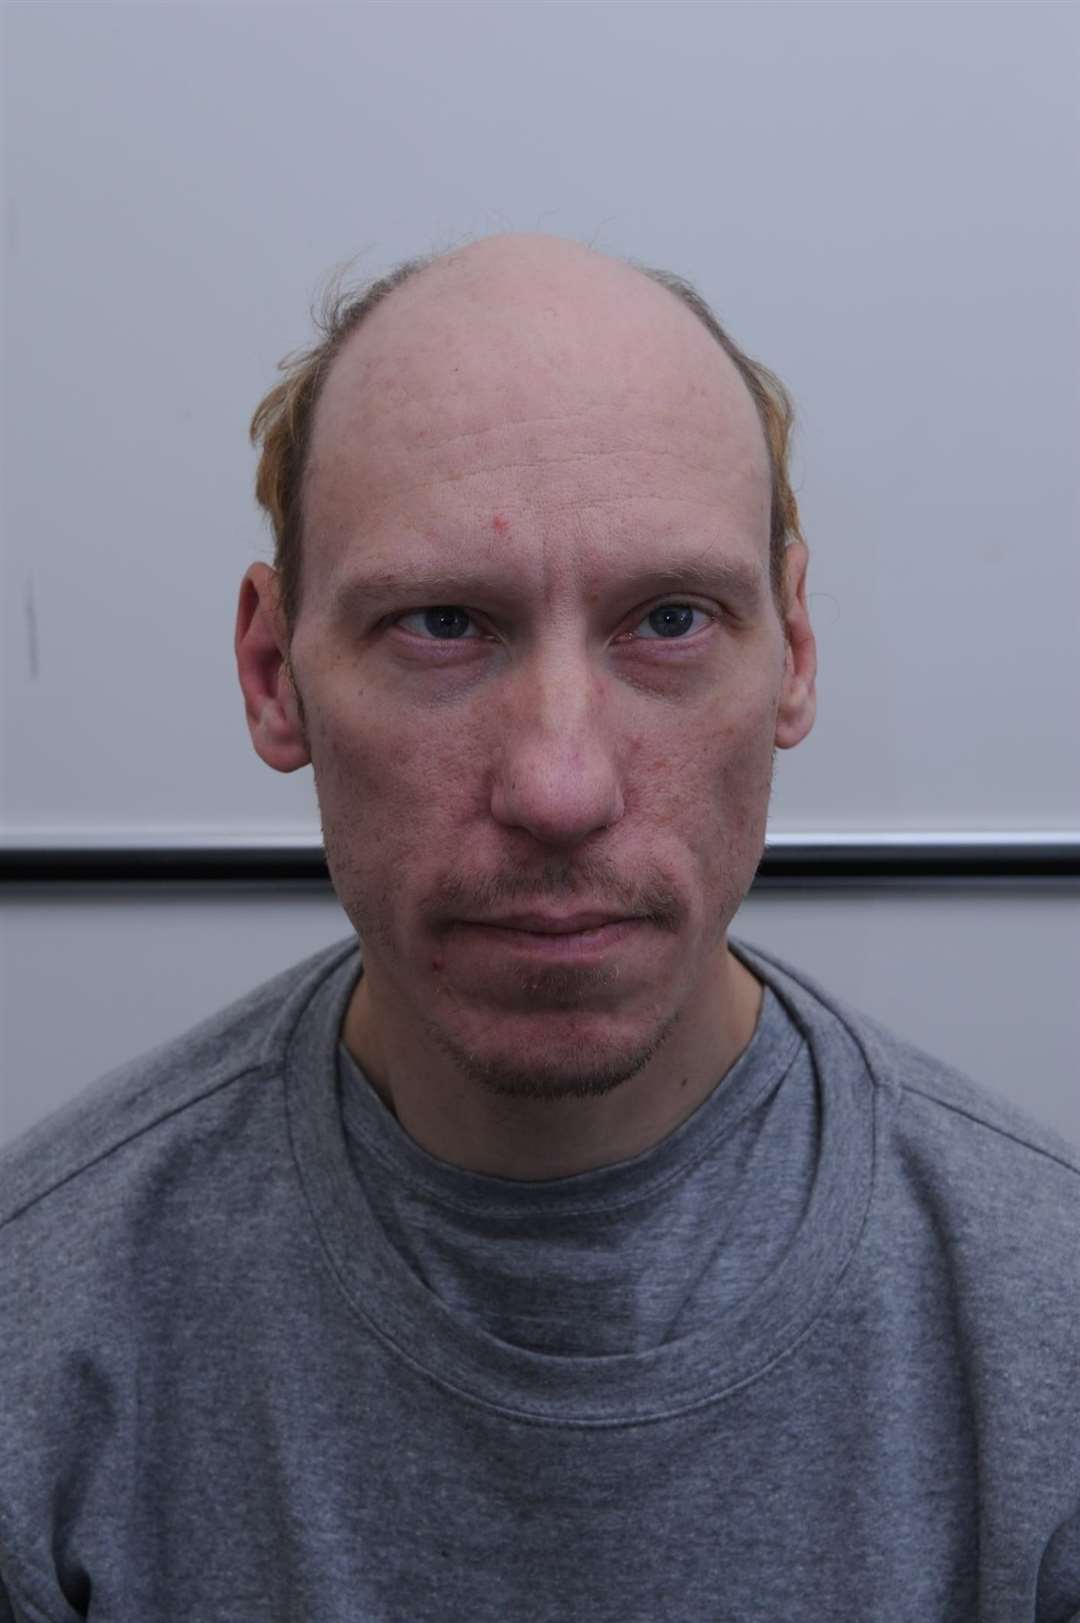 Stephen Port, who murdered four people